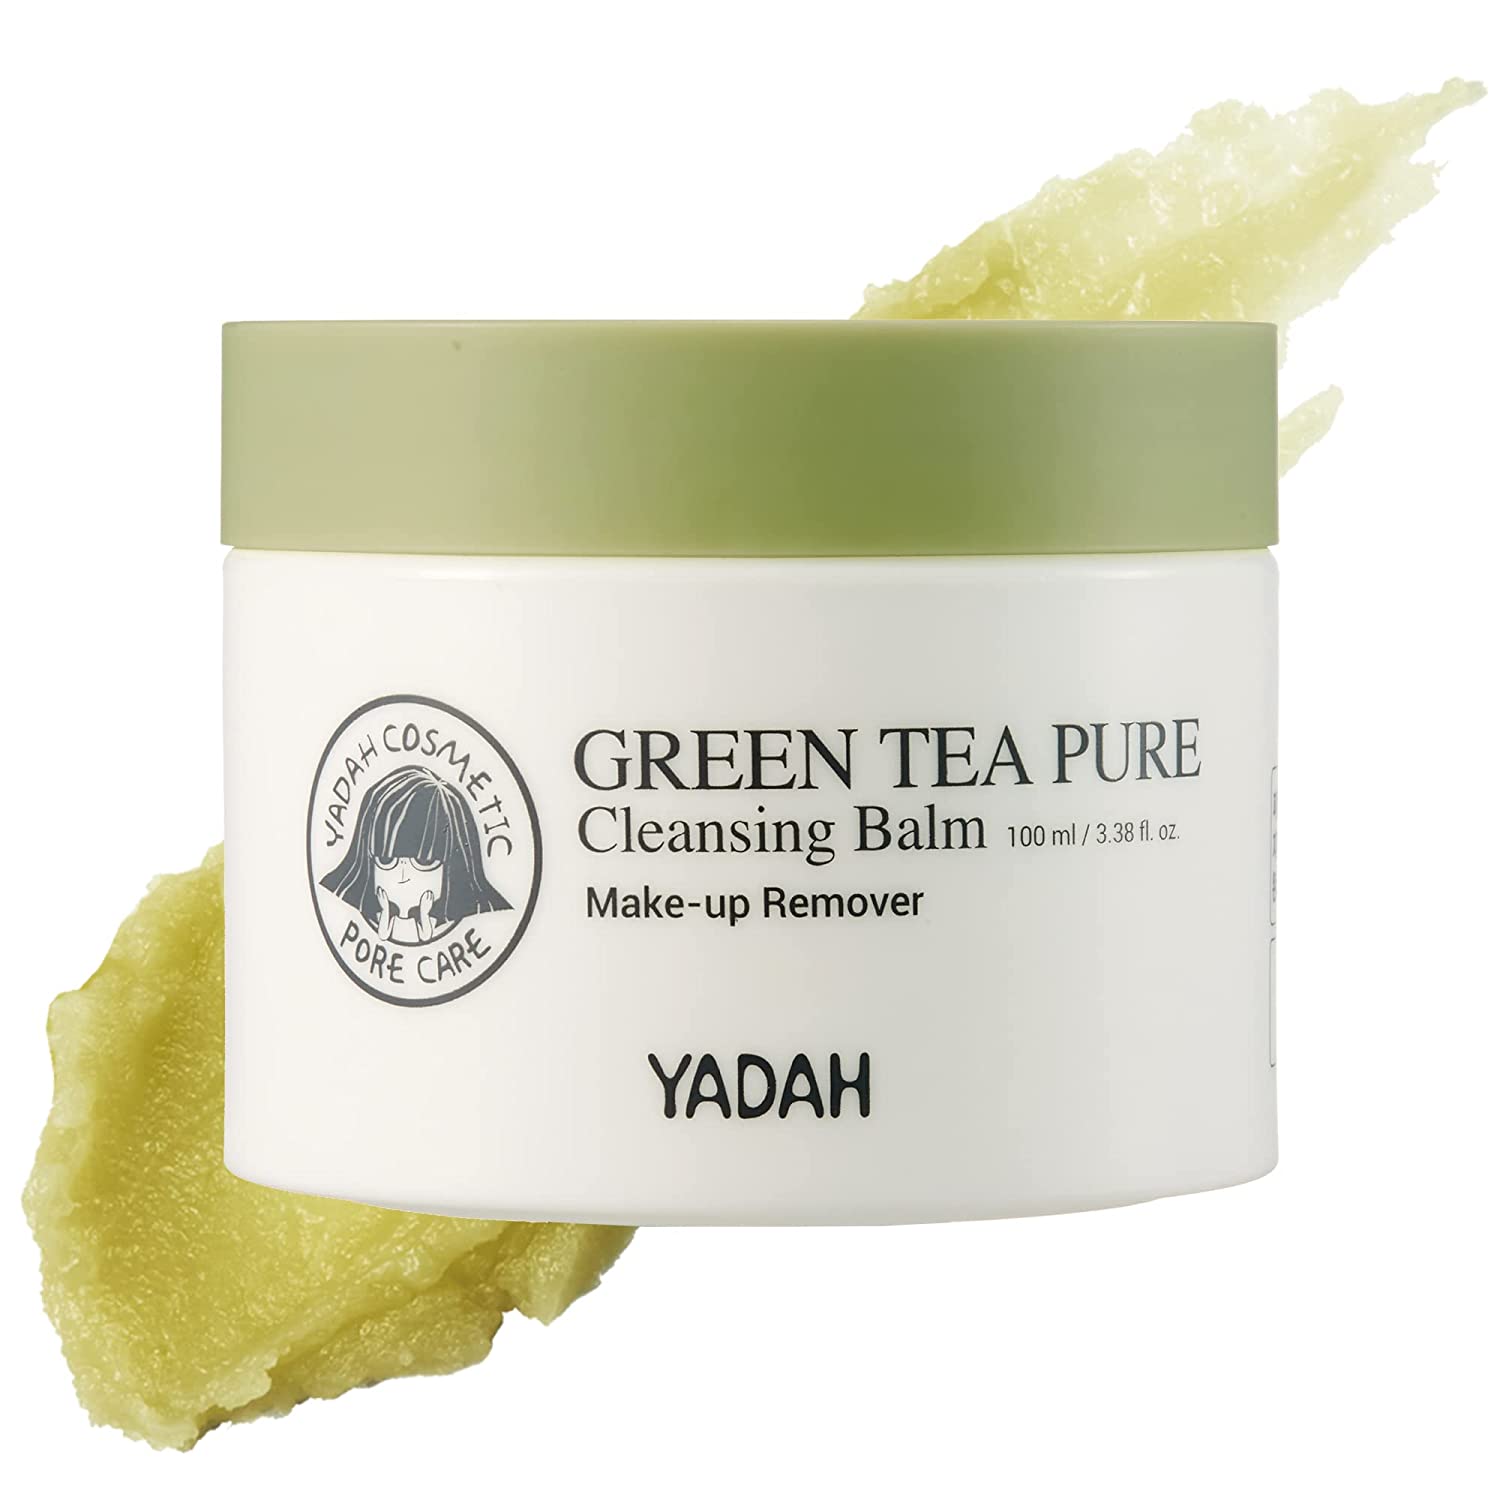 YADAH Cleansing Balm Makeup Remover